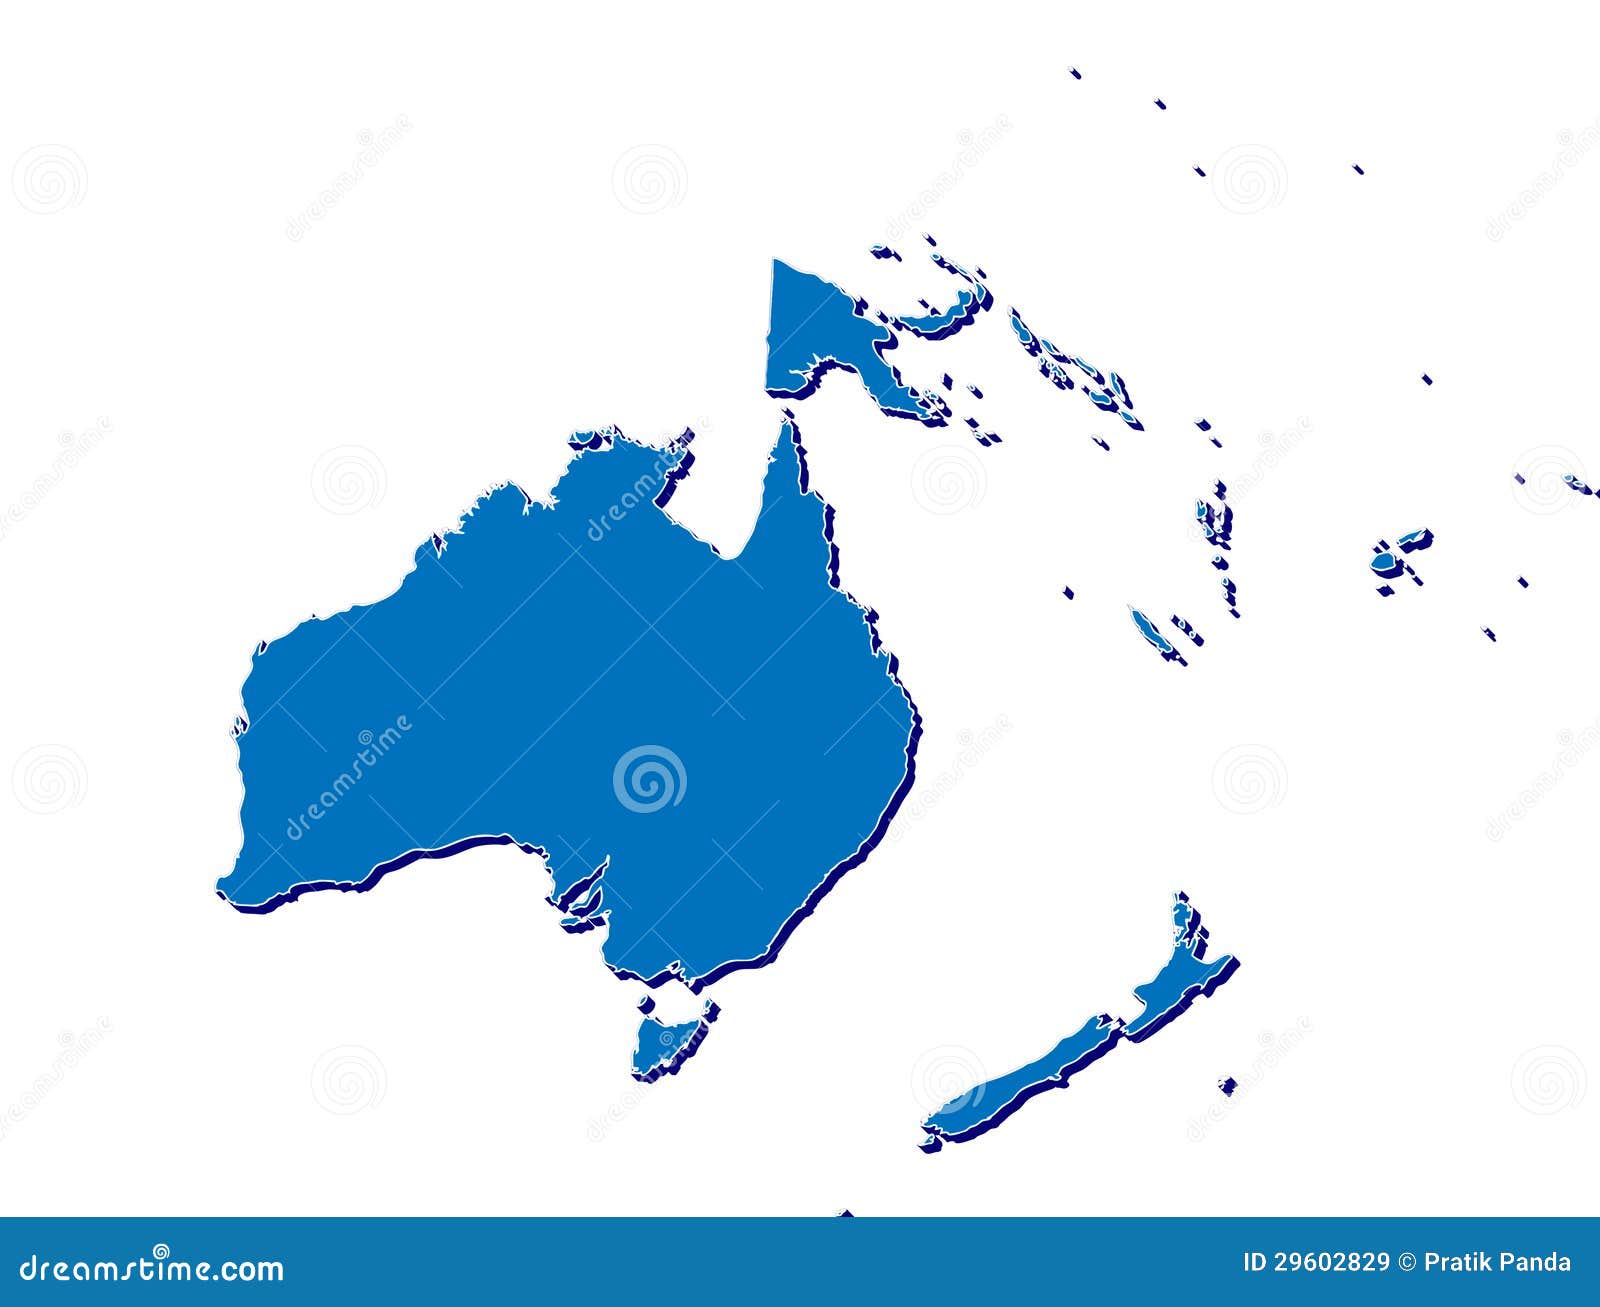 australia and oceania map in 3d